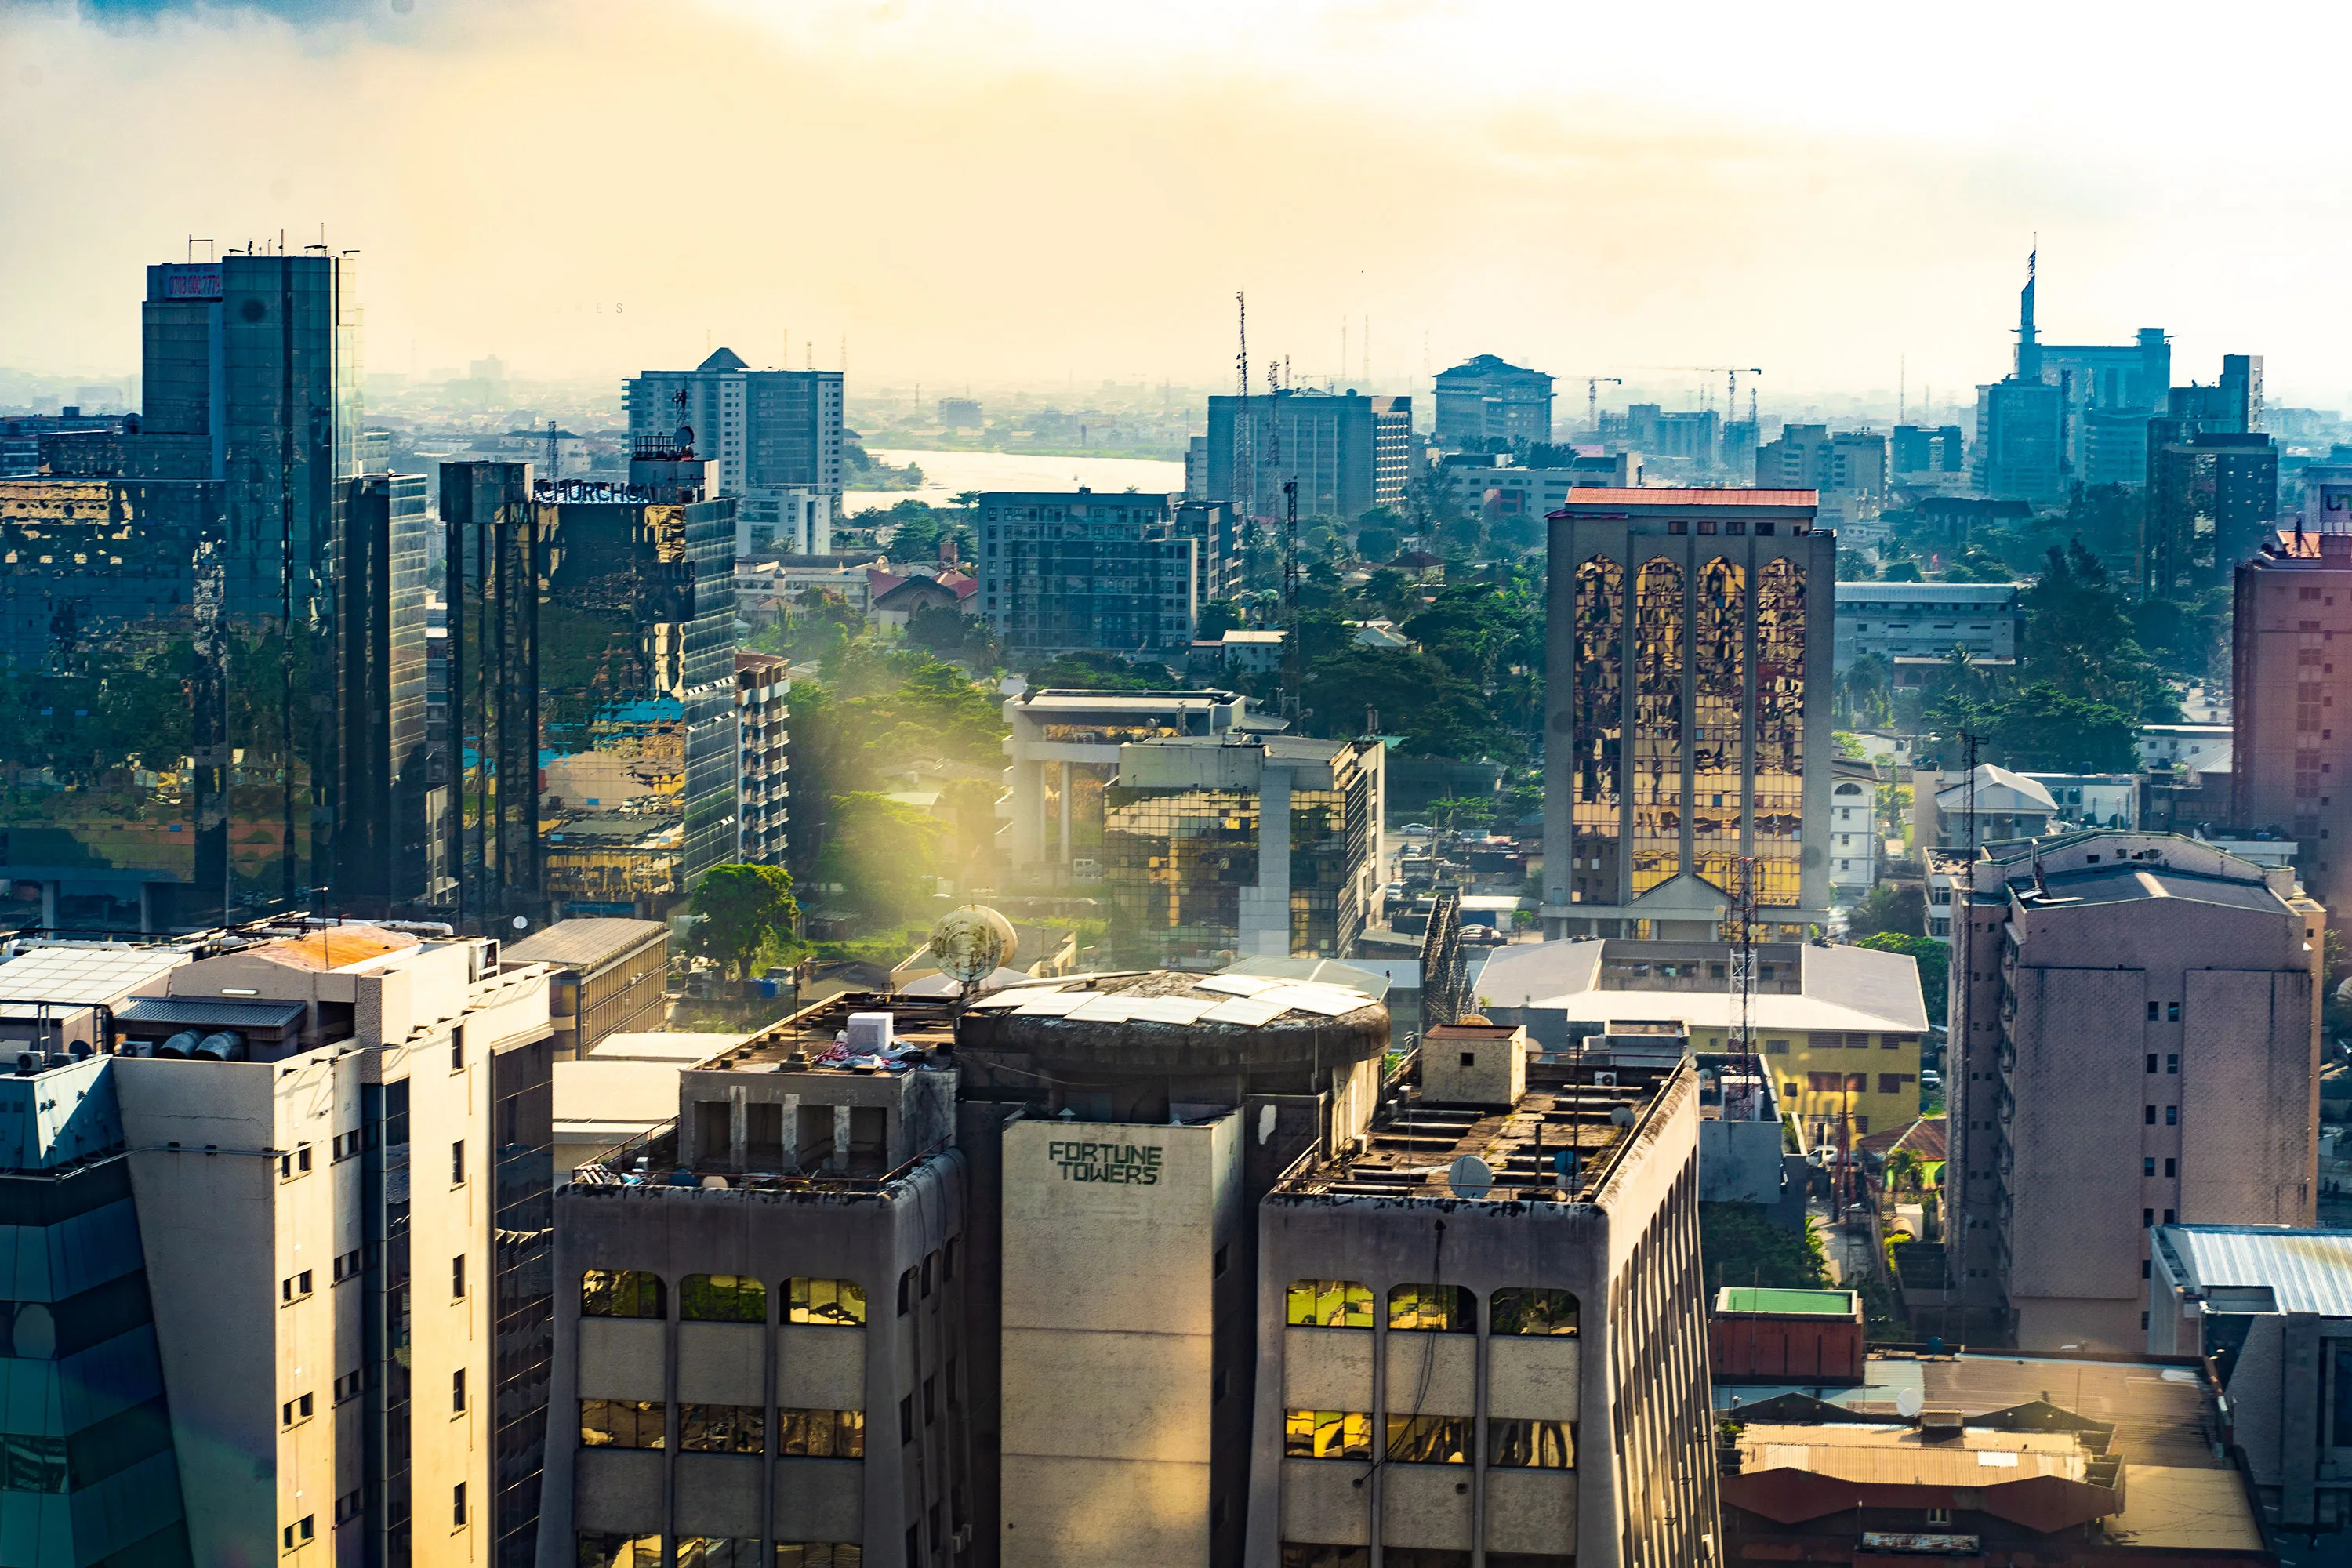 Urgent change needed to finance the development Africa’s cities, says AfDB